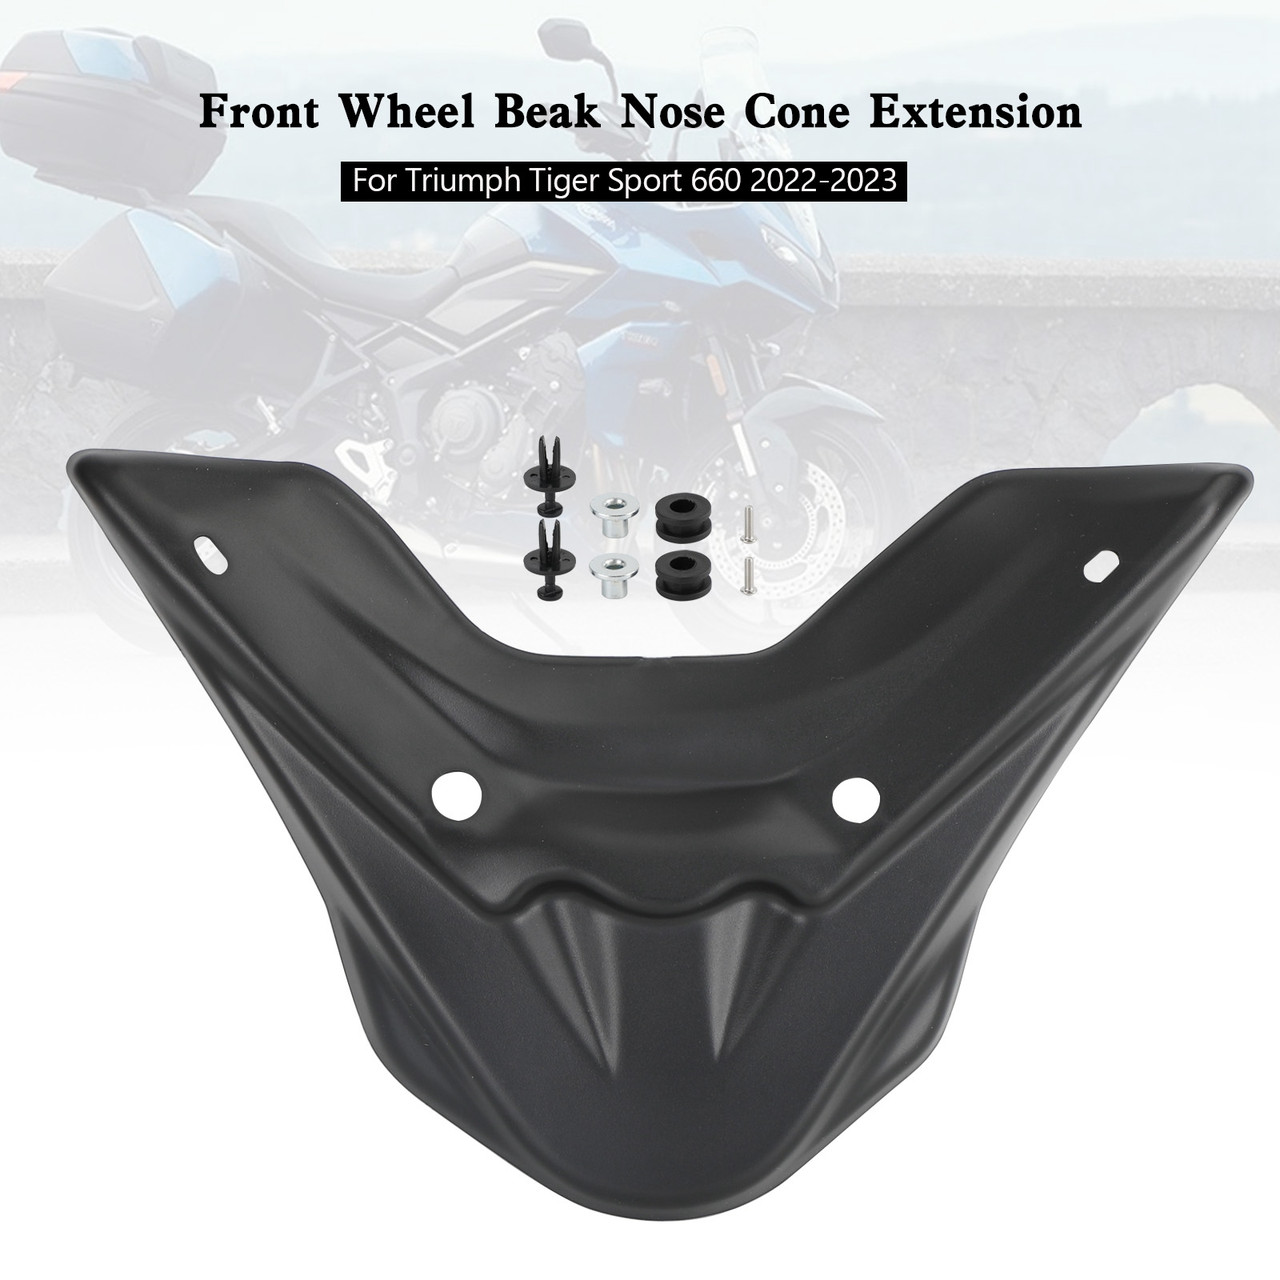 Front Wheel Beak Nose Cone Extension For Tiger Sport 660 2022-2023